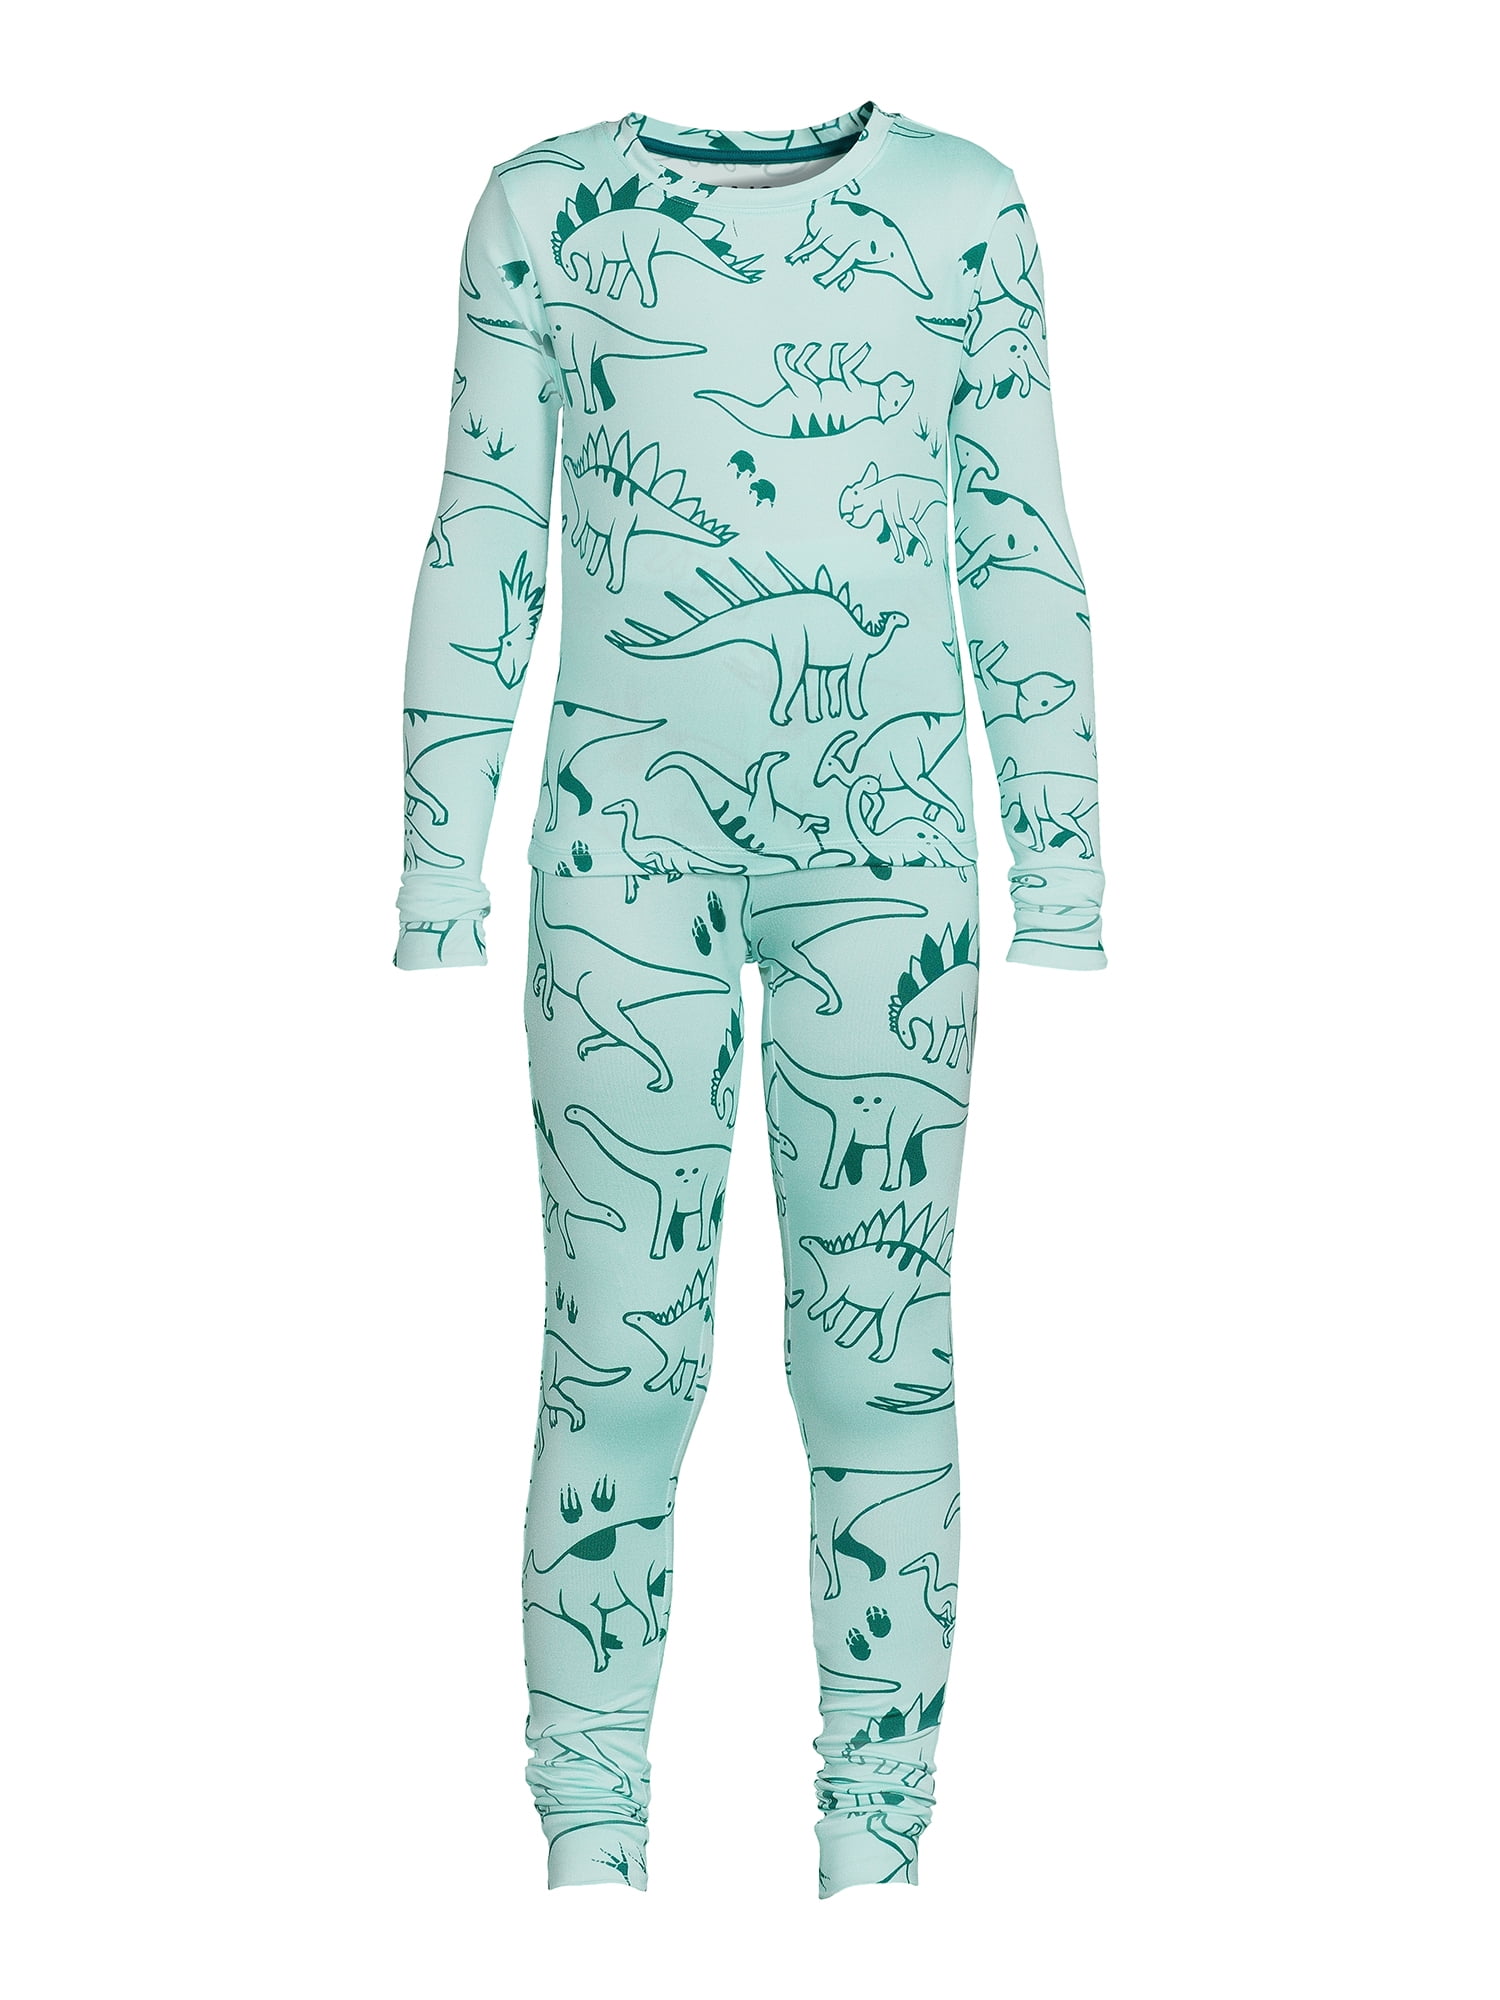 Renewold Sea Turtle Pjs for Boys Stretchy Long Sleeve Tee Pajamas Pullover  Tops Set 2 Pack Athletic Jogger Walking Clothes Thermal Nightwear Pullover  Tops Size 3-4 